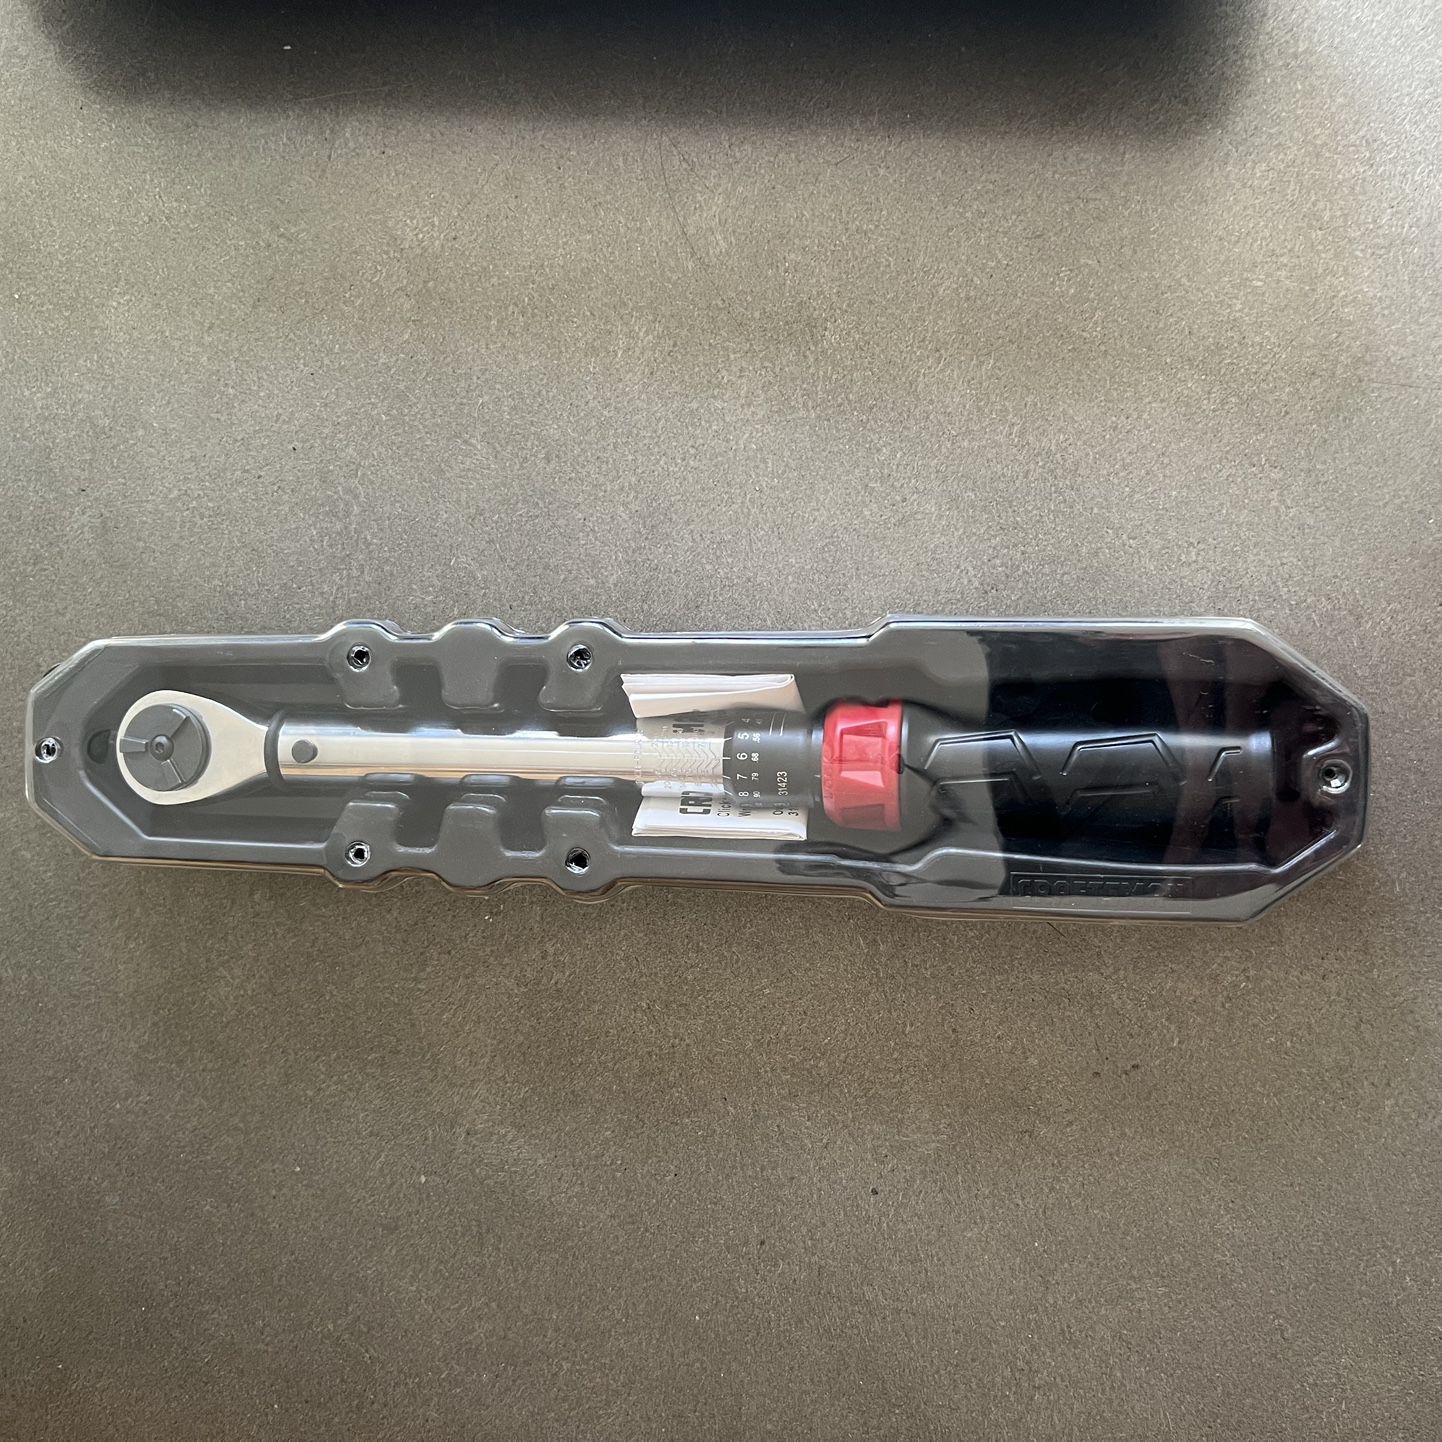 Craftsman 3/8 Drive Torque Wrench 